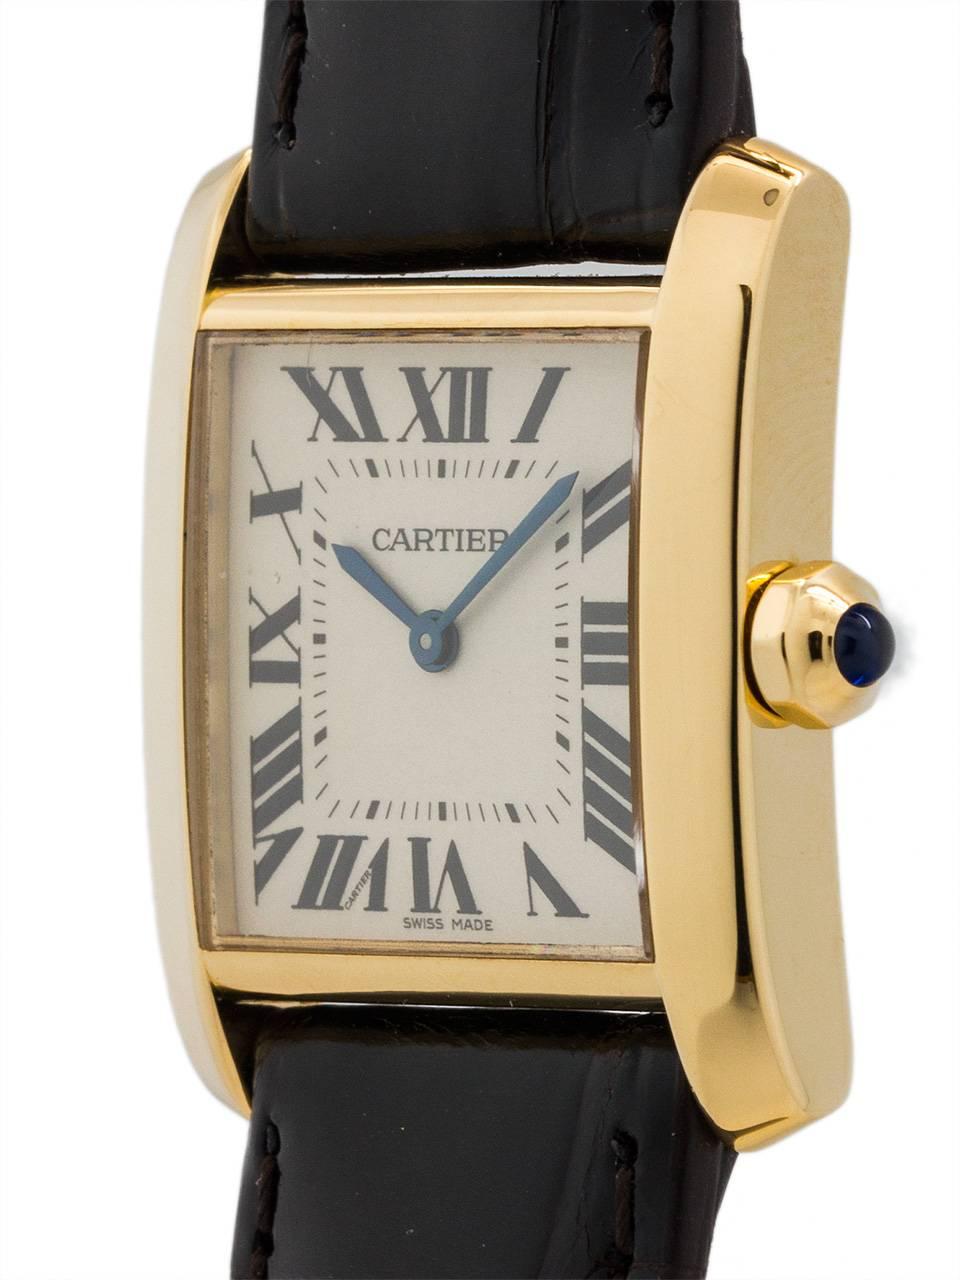 
Cartier 18K YG midsize Tank Francaise 26 X 35 mm classic model on strap with 18K Cartier tang buckle. Featuring classic silvered guilloche dial with  black printed Roman numerals and blued steel hands and sapphire cabachon crown. Battery powered